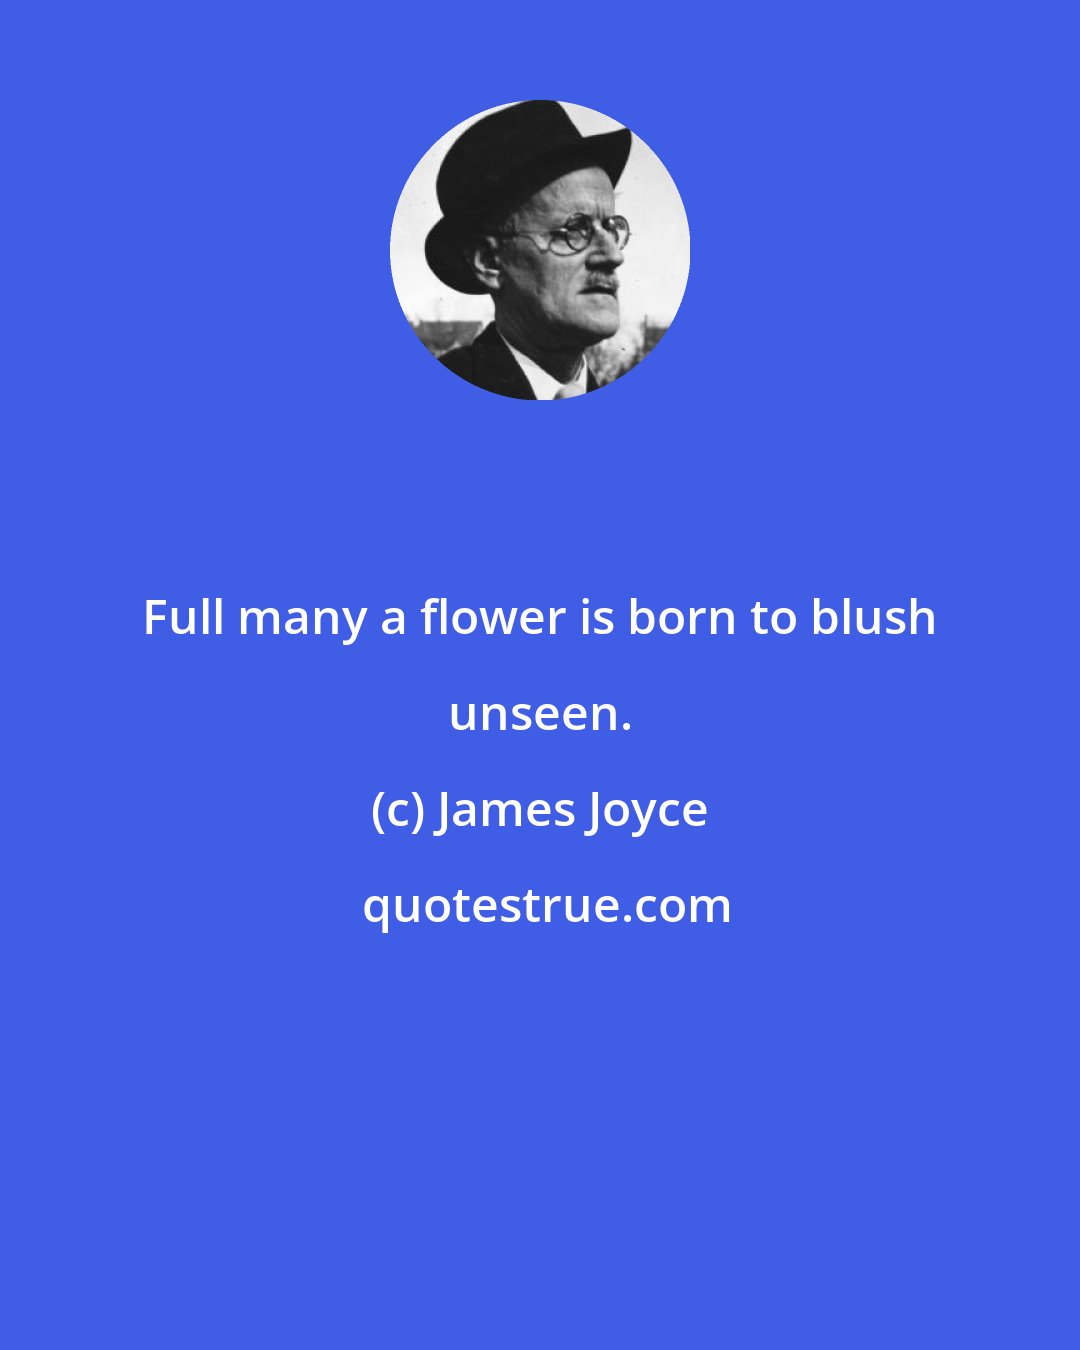 James Joyce: Full many a flower is born to blush unseen.